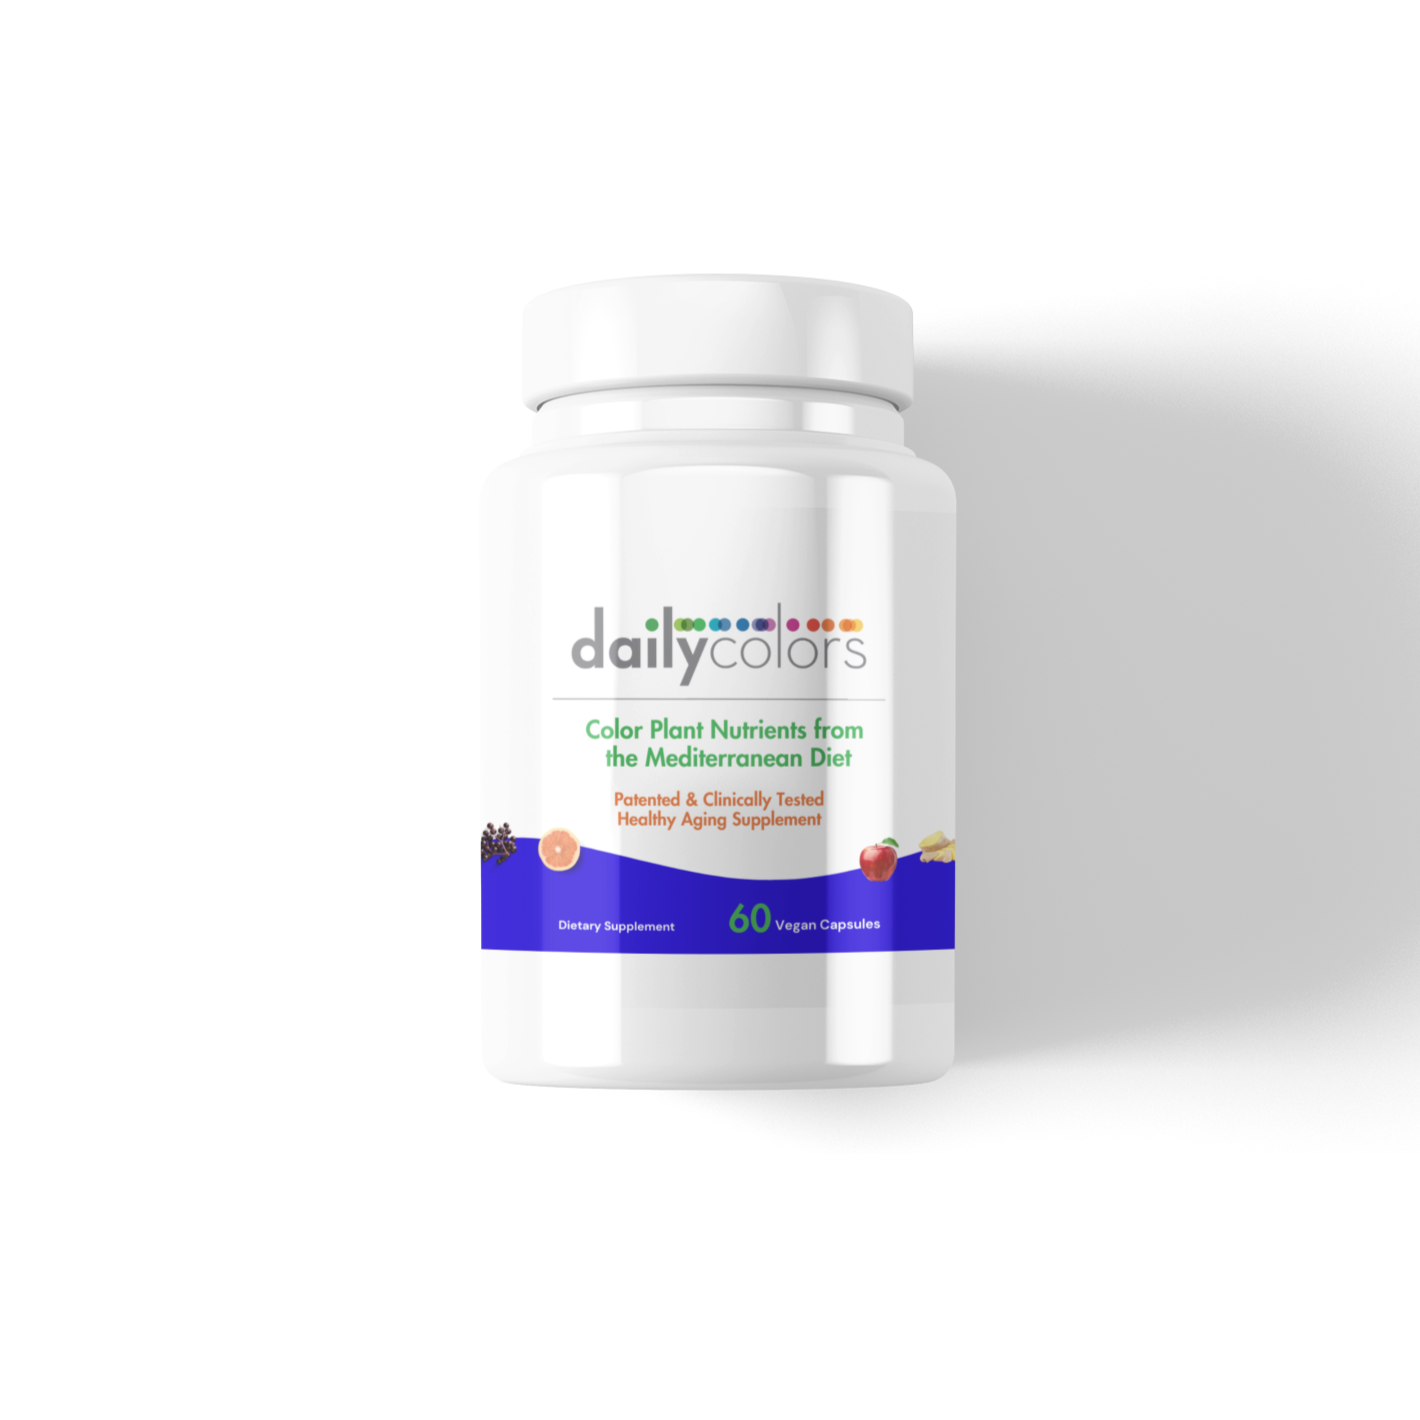 DailyColors™ Color Plant Nutrients from the Mediterranean Diet